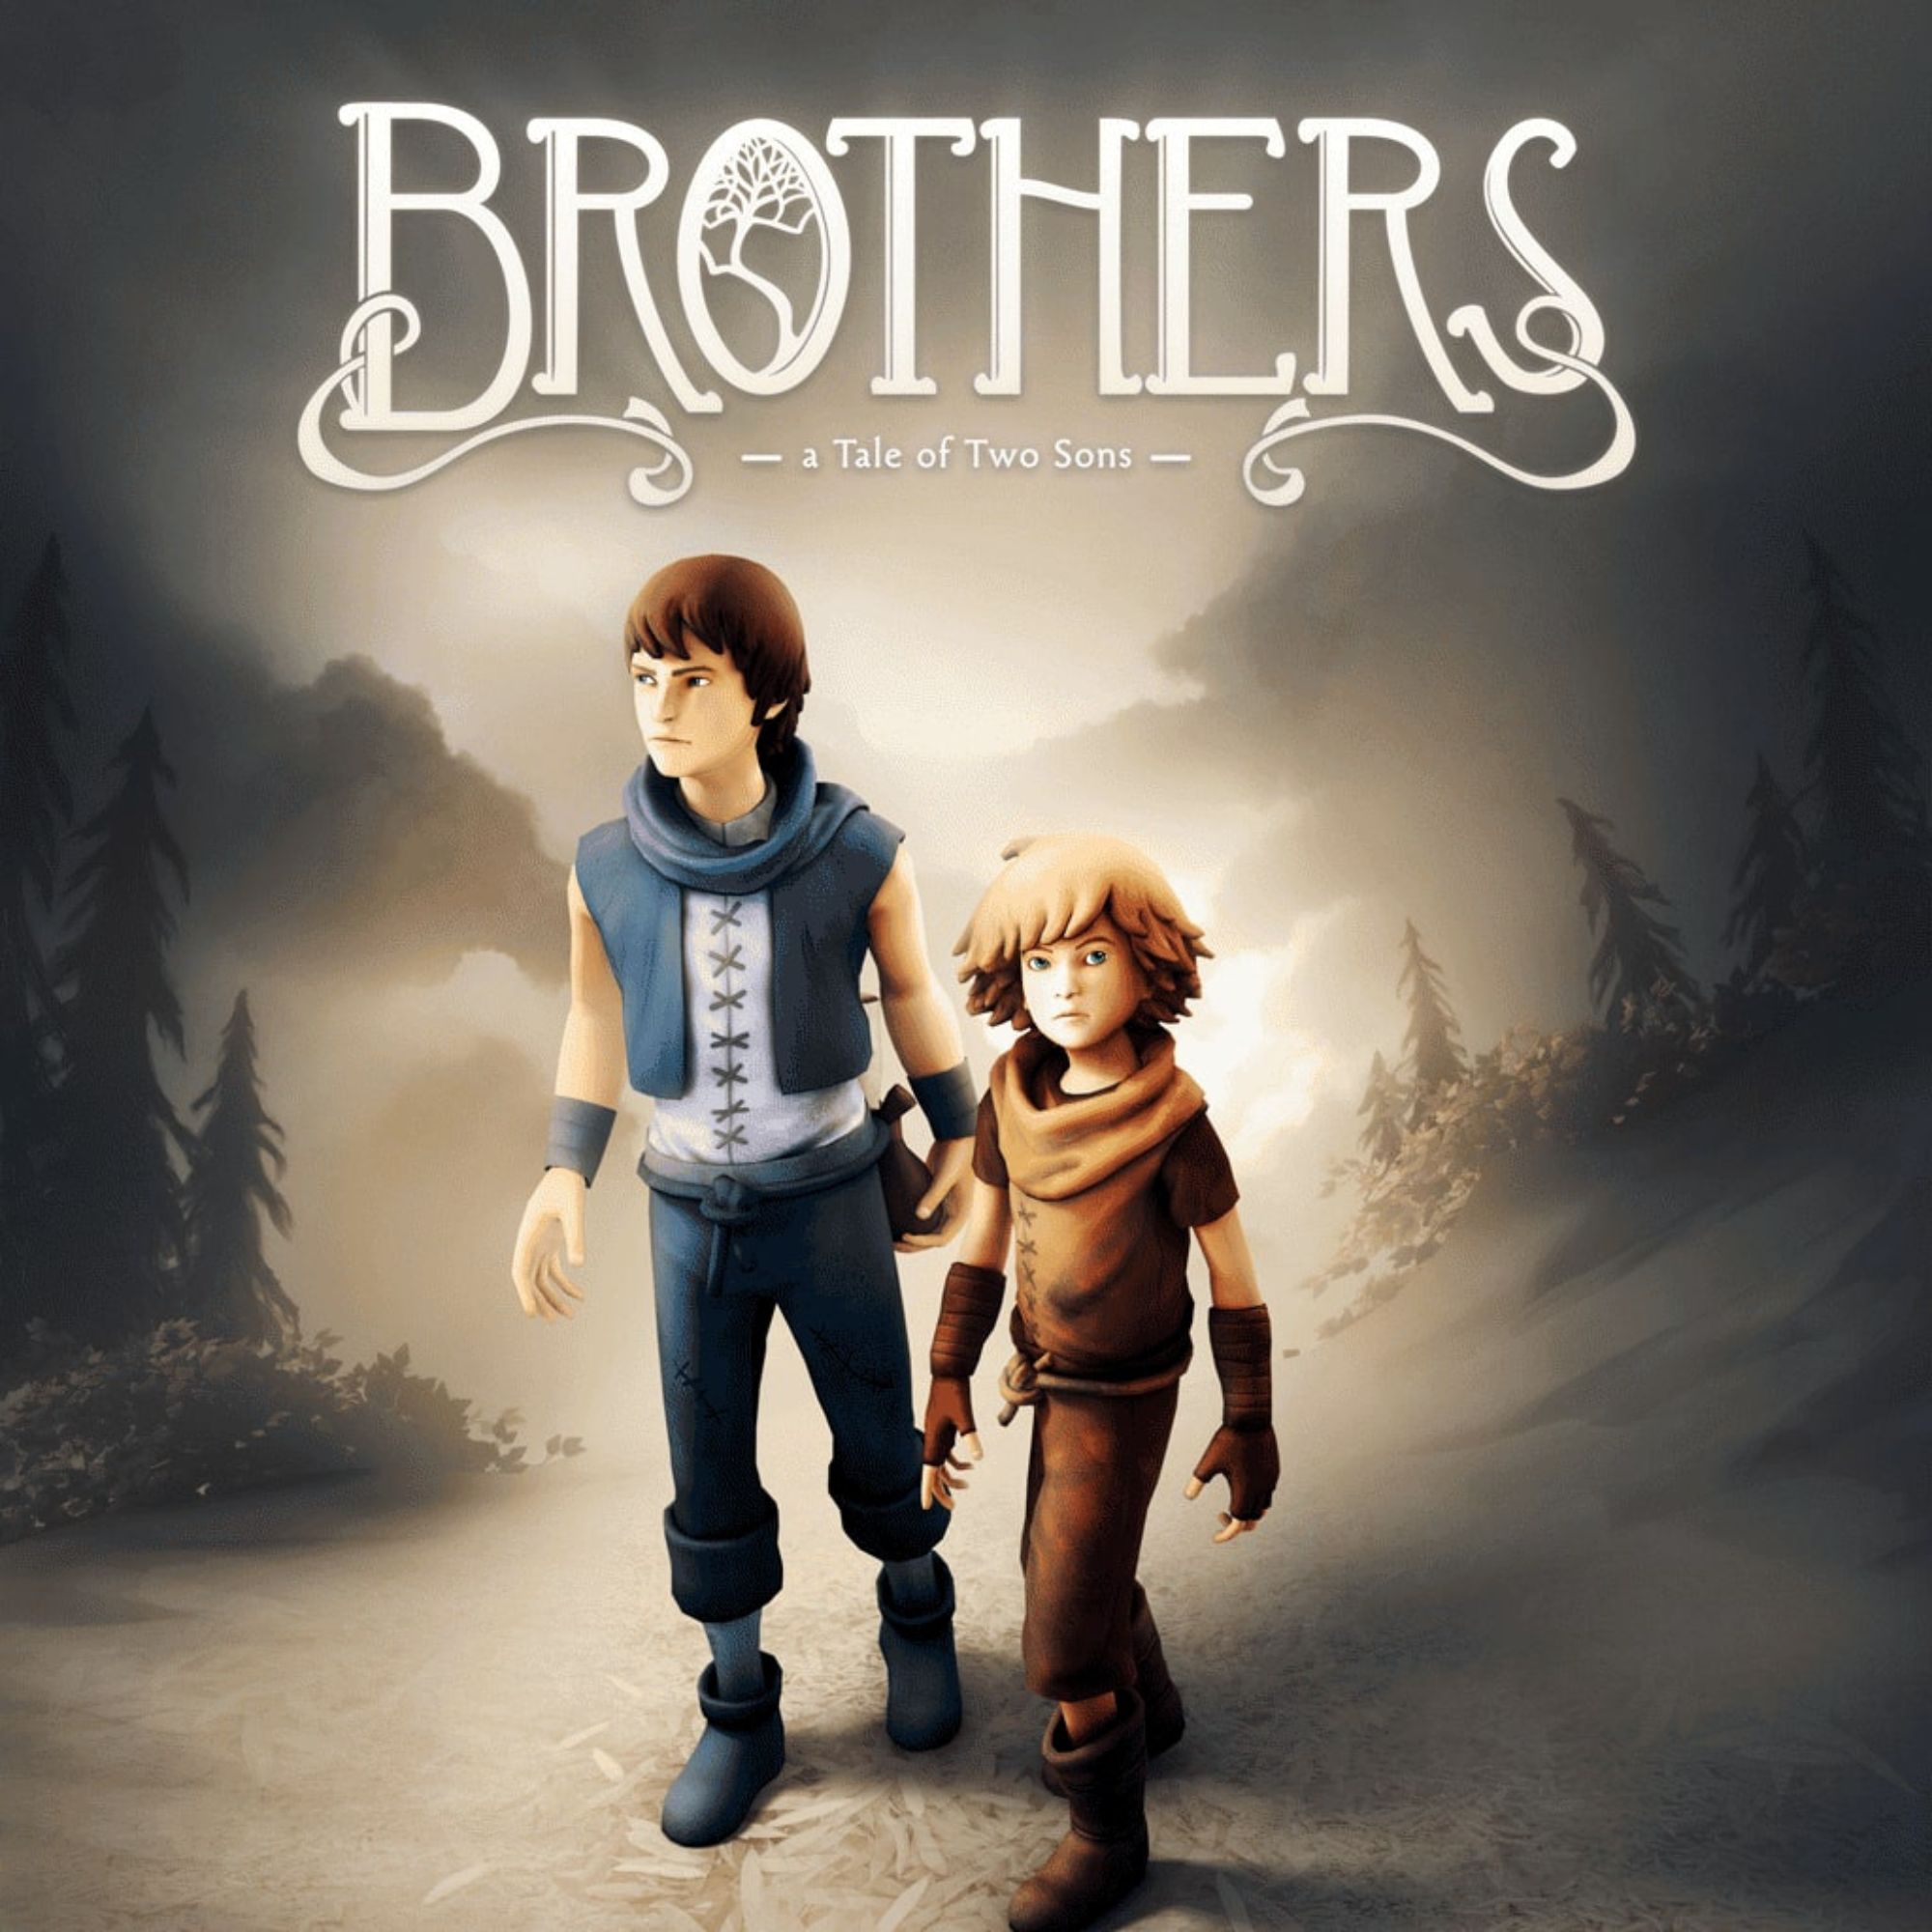 Cover image for Brothers: A Tale of Two Sons in 2000x2000 showing two boys walking in the wild